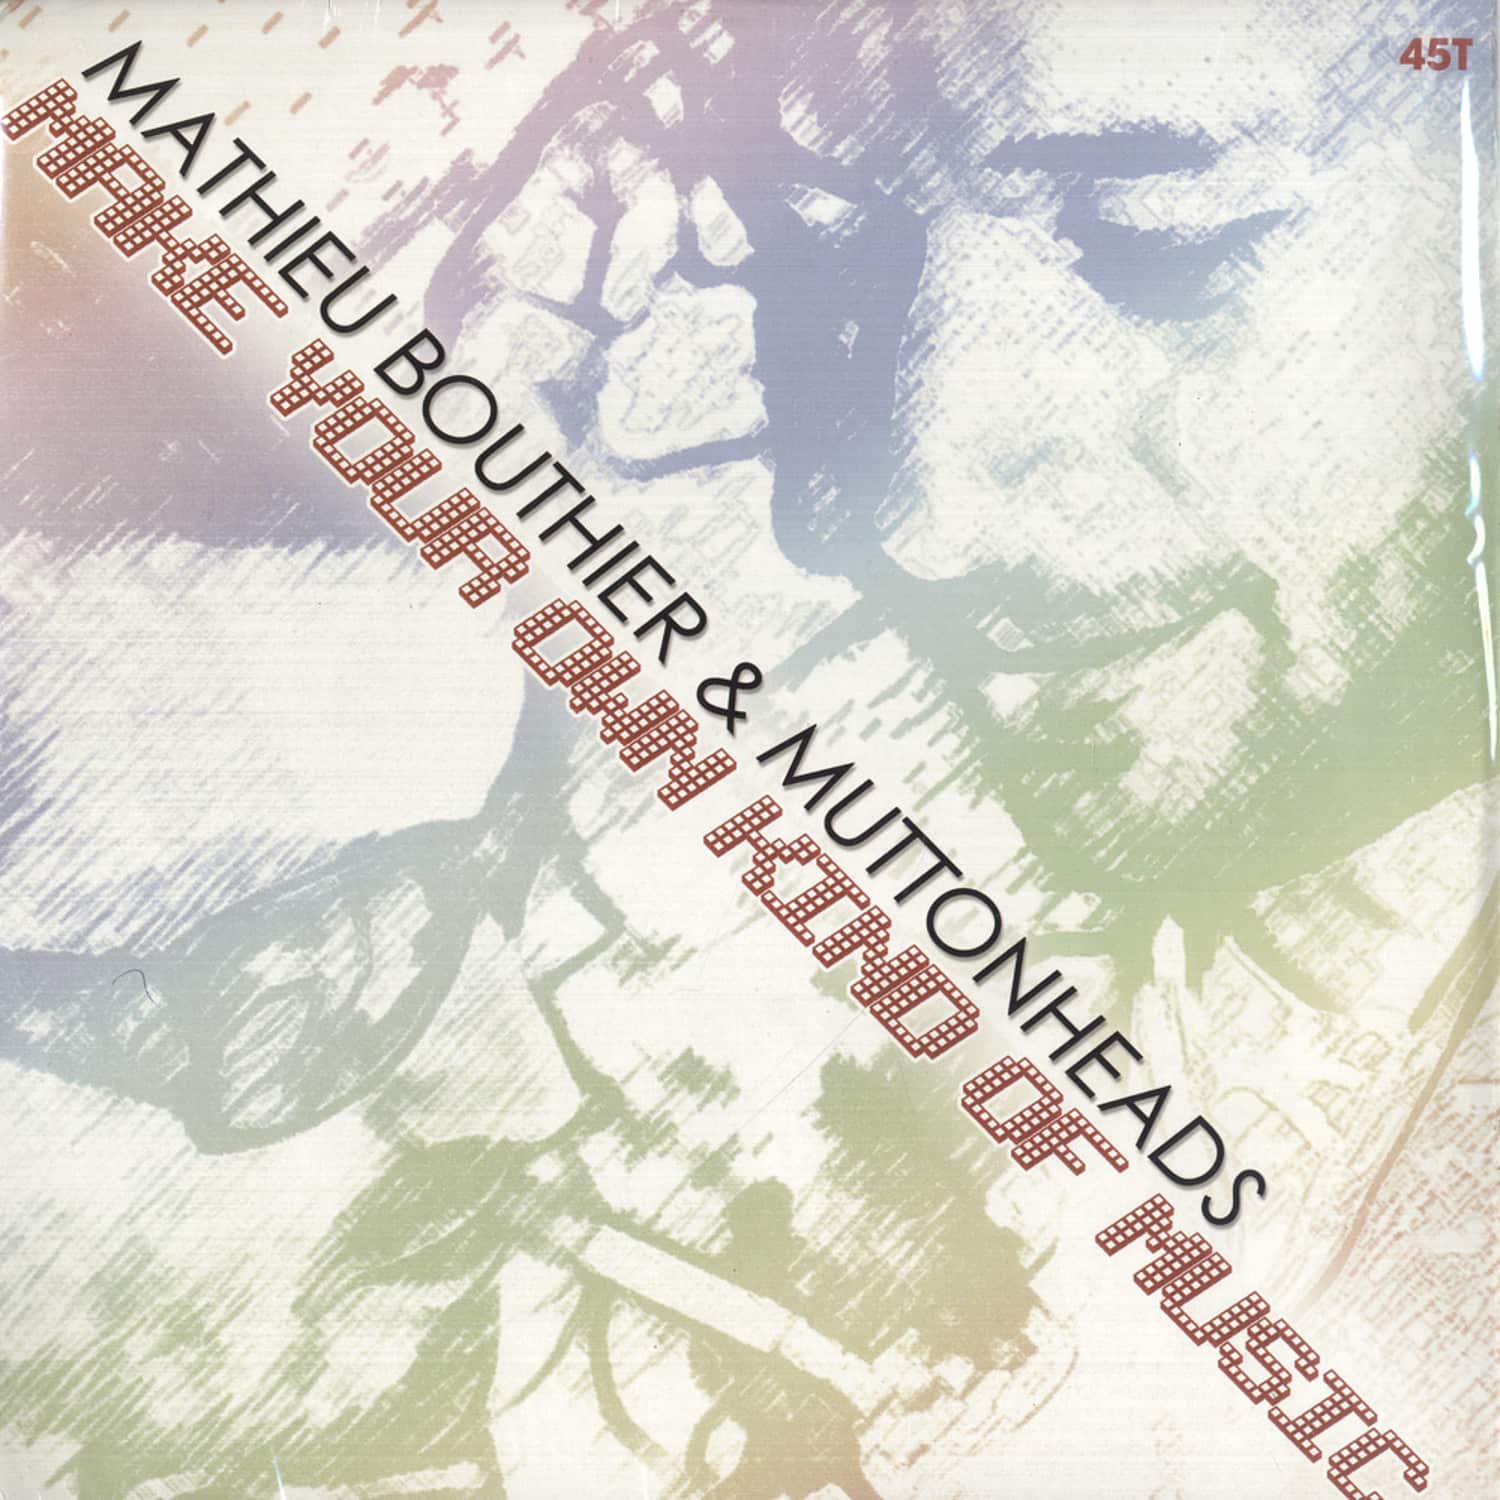 Mathieu Bouthier / Muttonheads - MAKE YOUR OWN KIND OF MUSIC